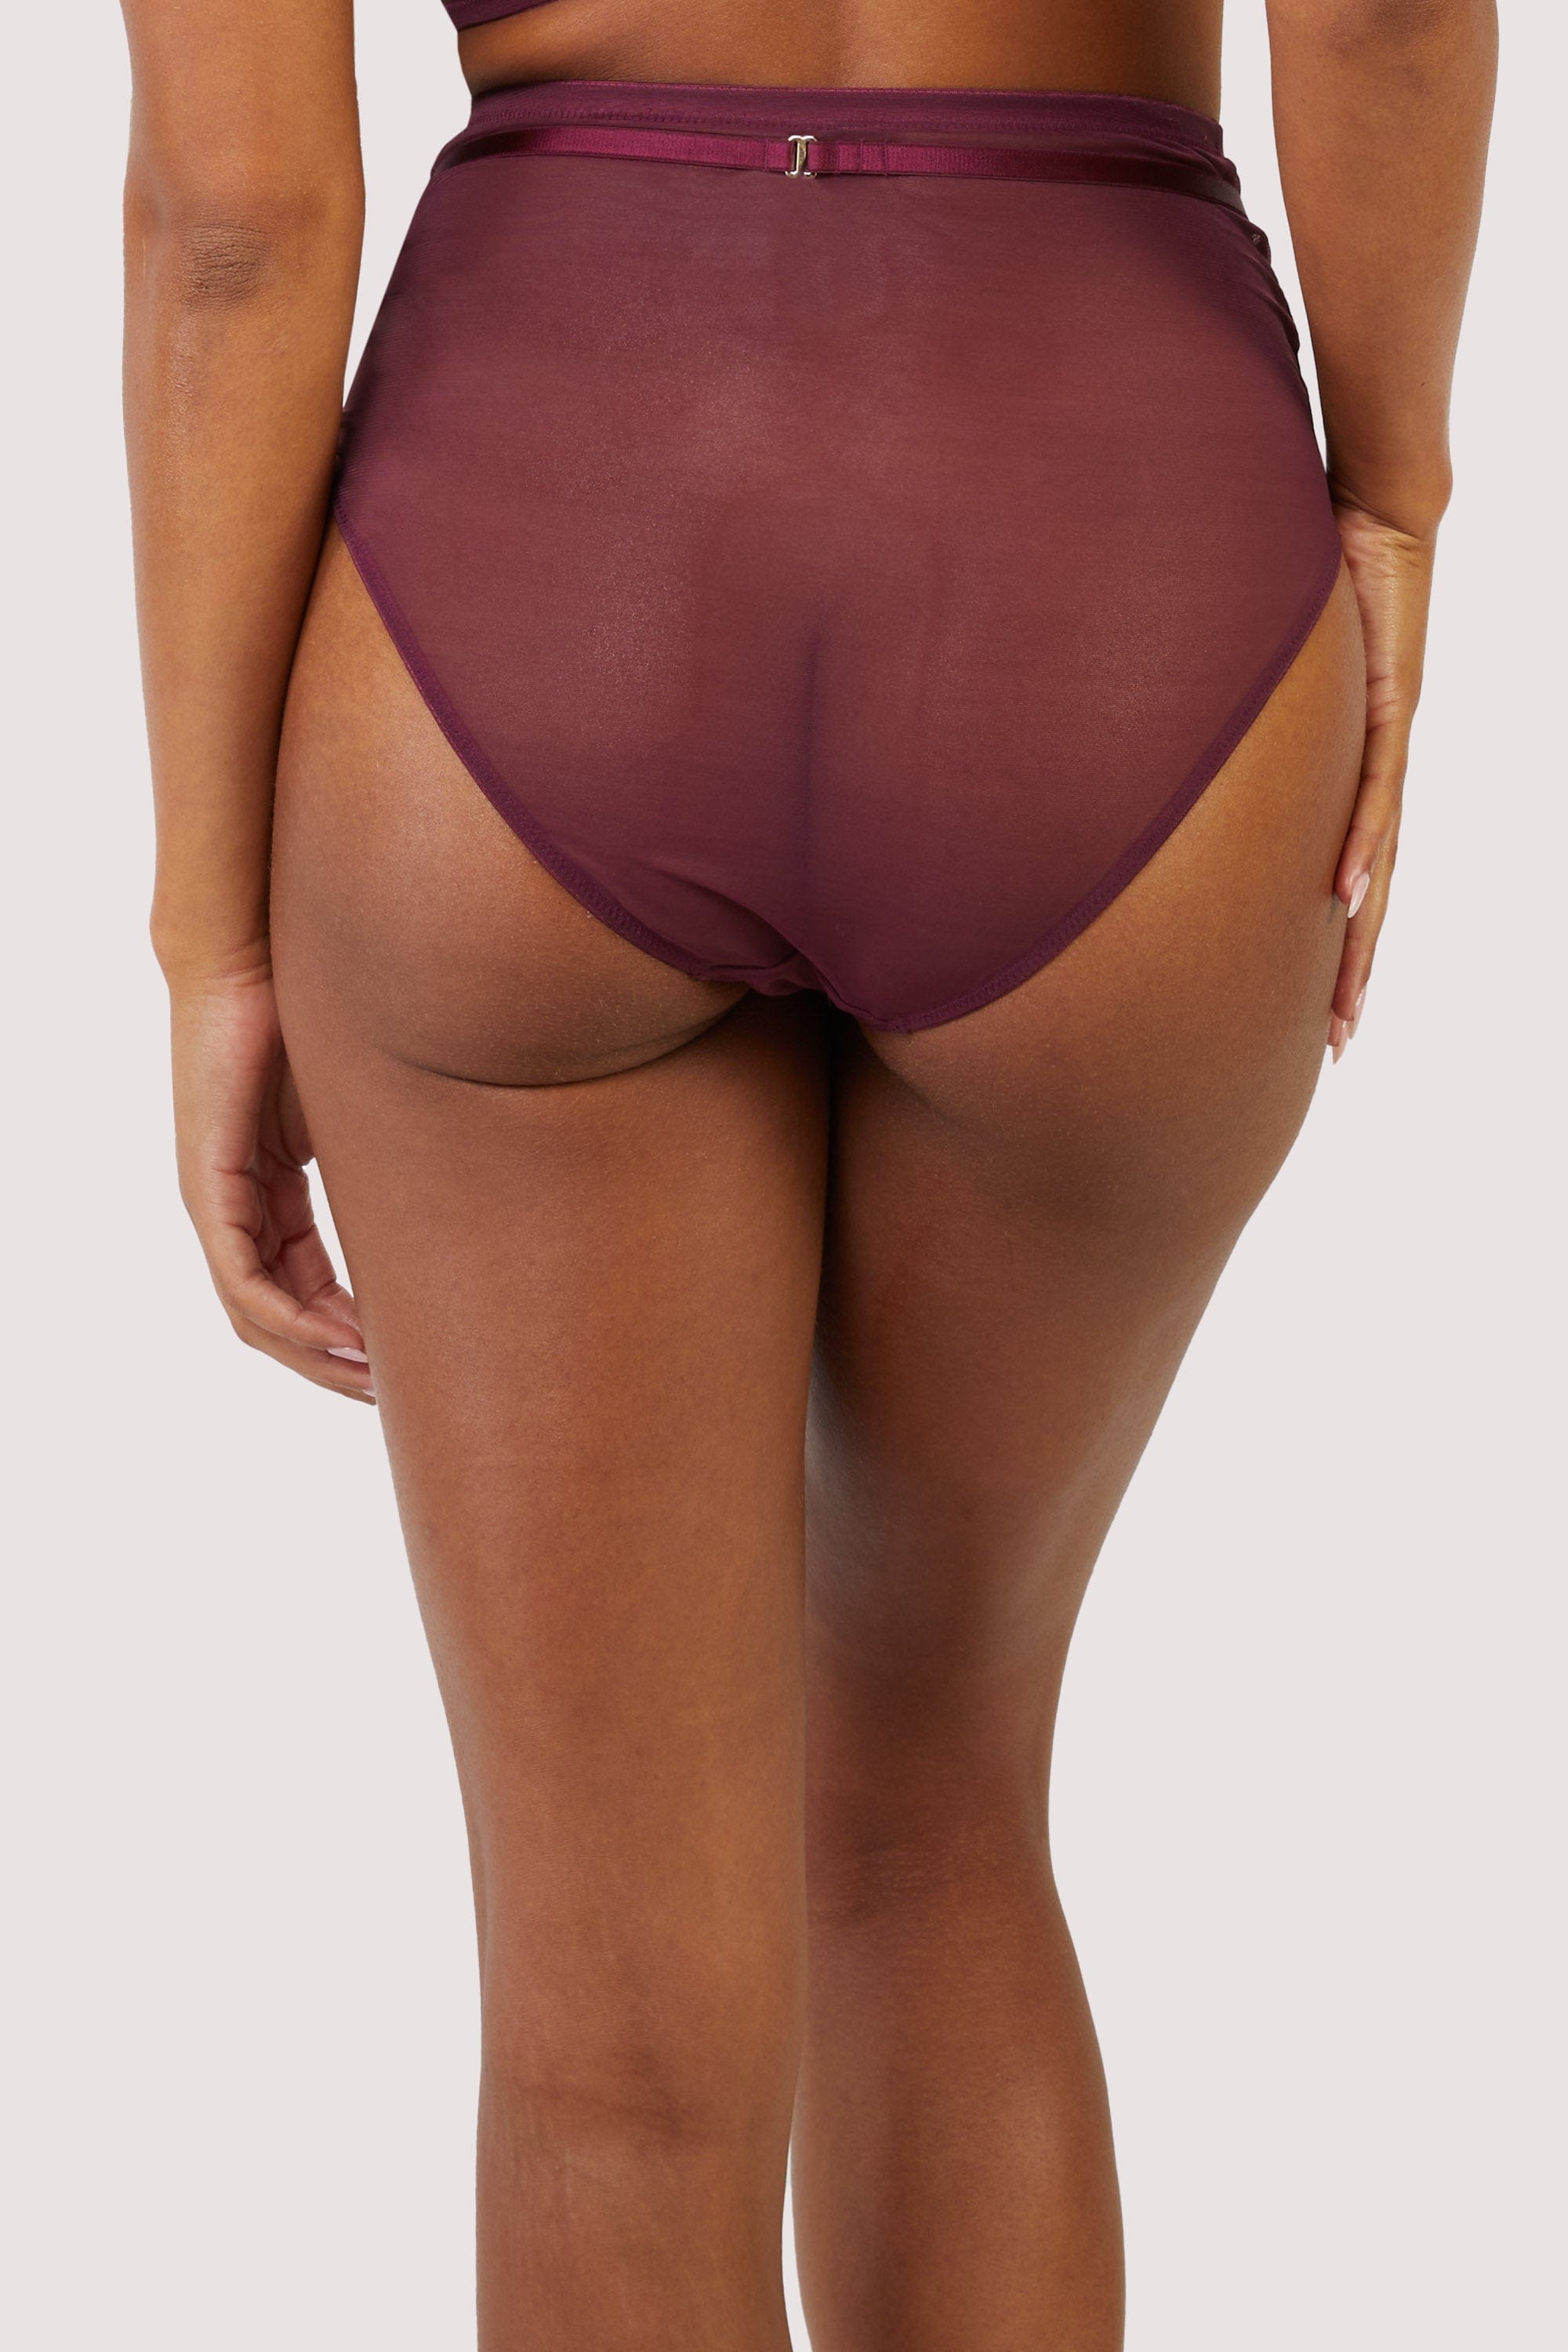 Dark purple-red mesh brief with visible gold hardware and crossover panelling across the front.